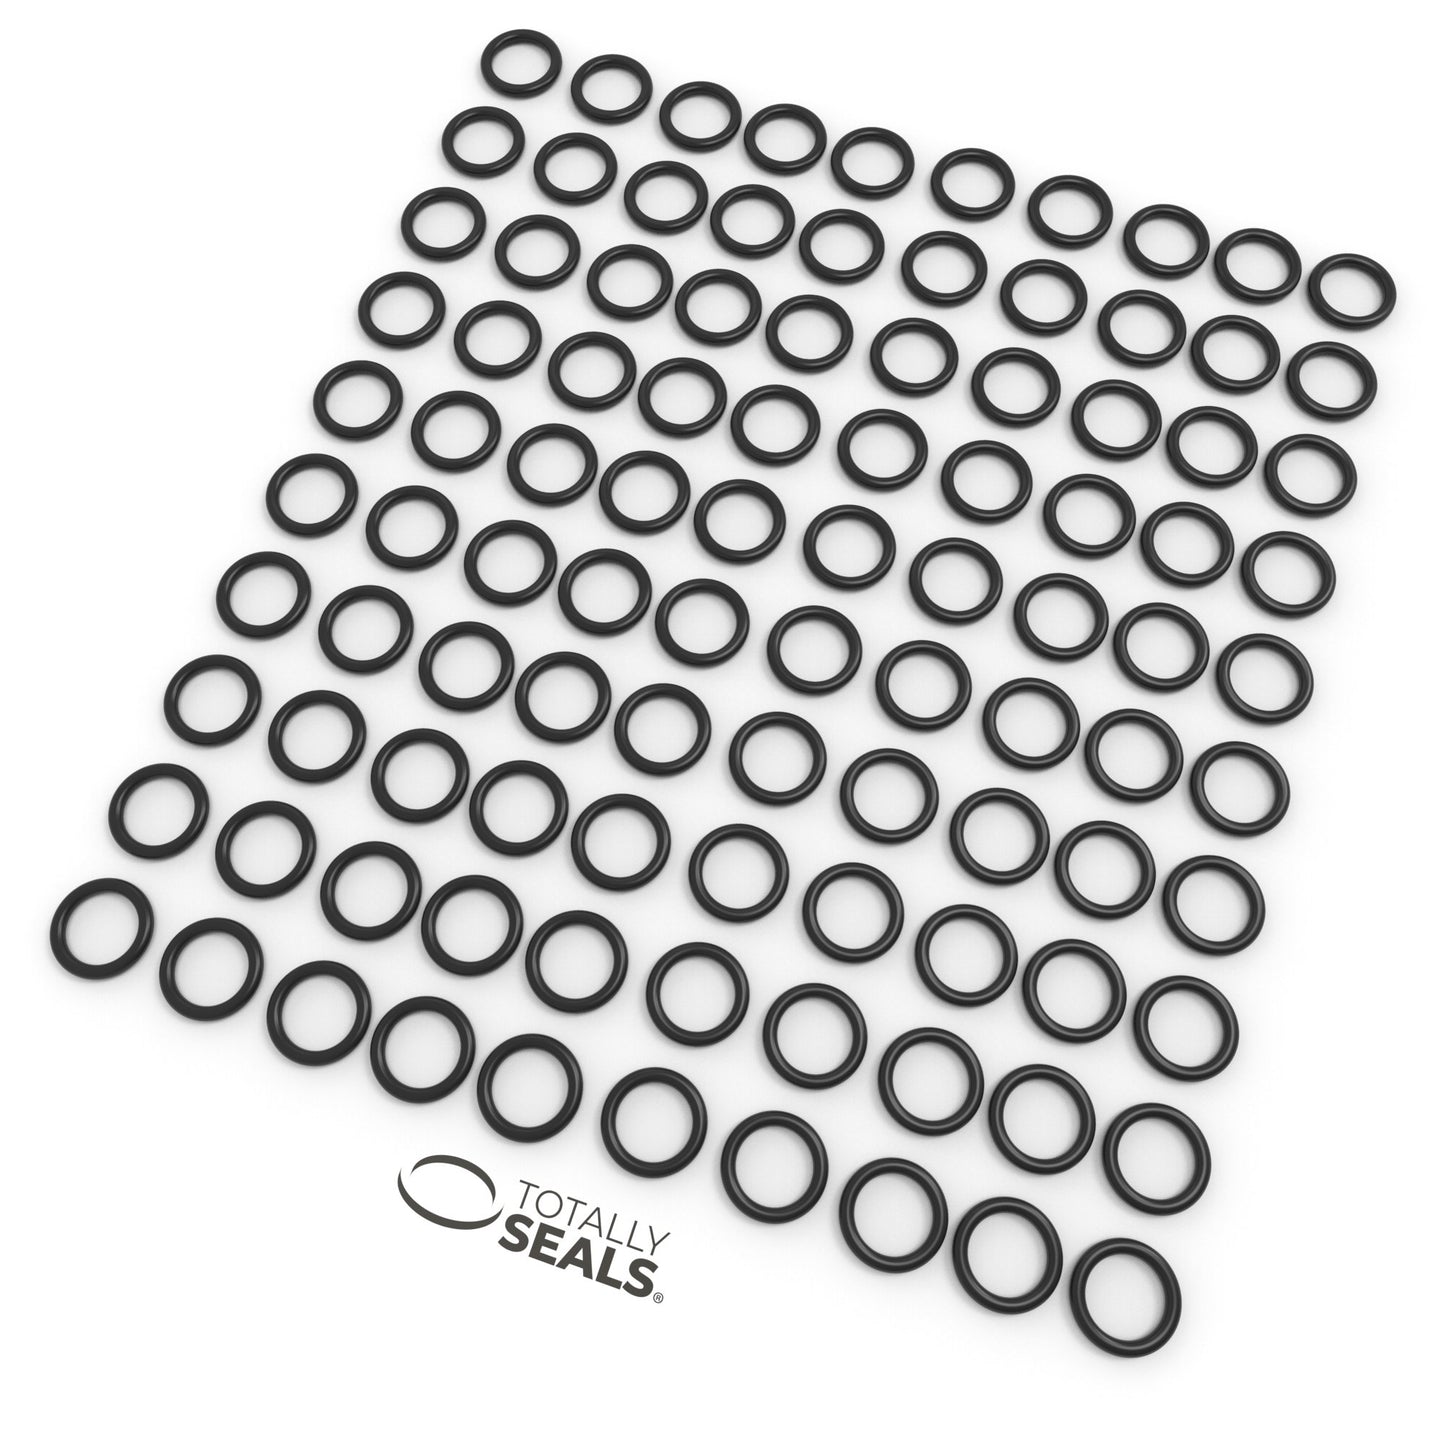 20mm x 3.5mm (27mm OD) Nitrile O-Rings - Totally Seals®